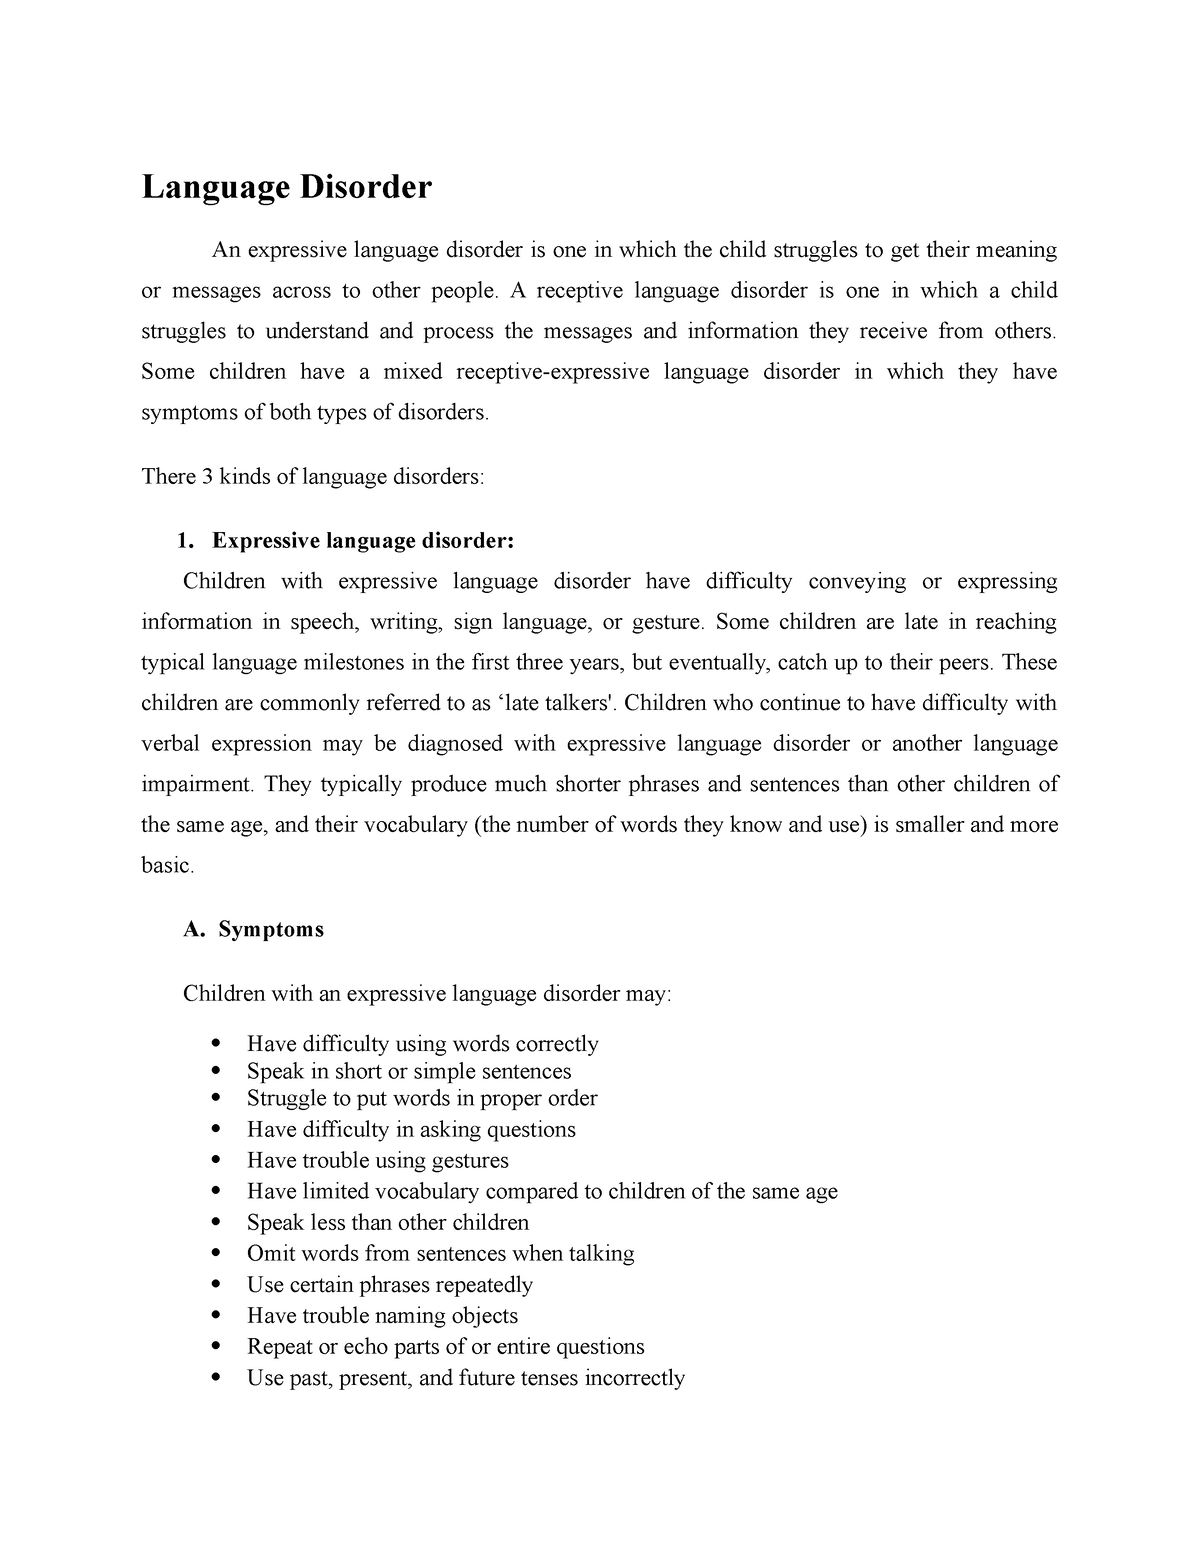 essay about language disorder